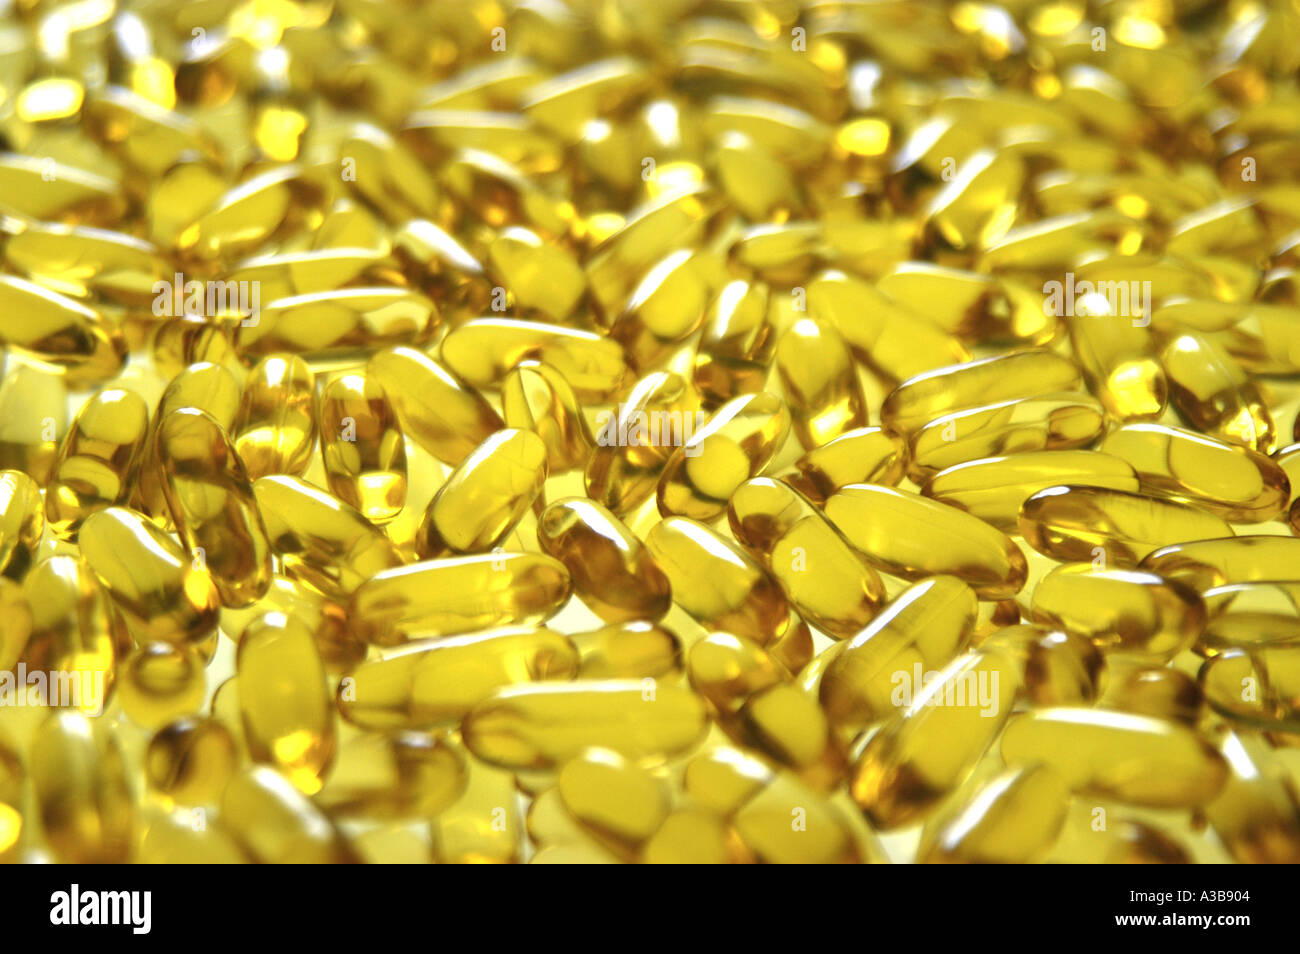 Evening Primrose Oil capsules, shot with shallow depth of field to make distant ones out of focus. Stock Photo